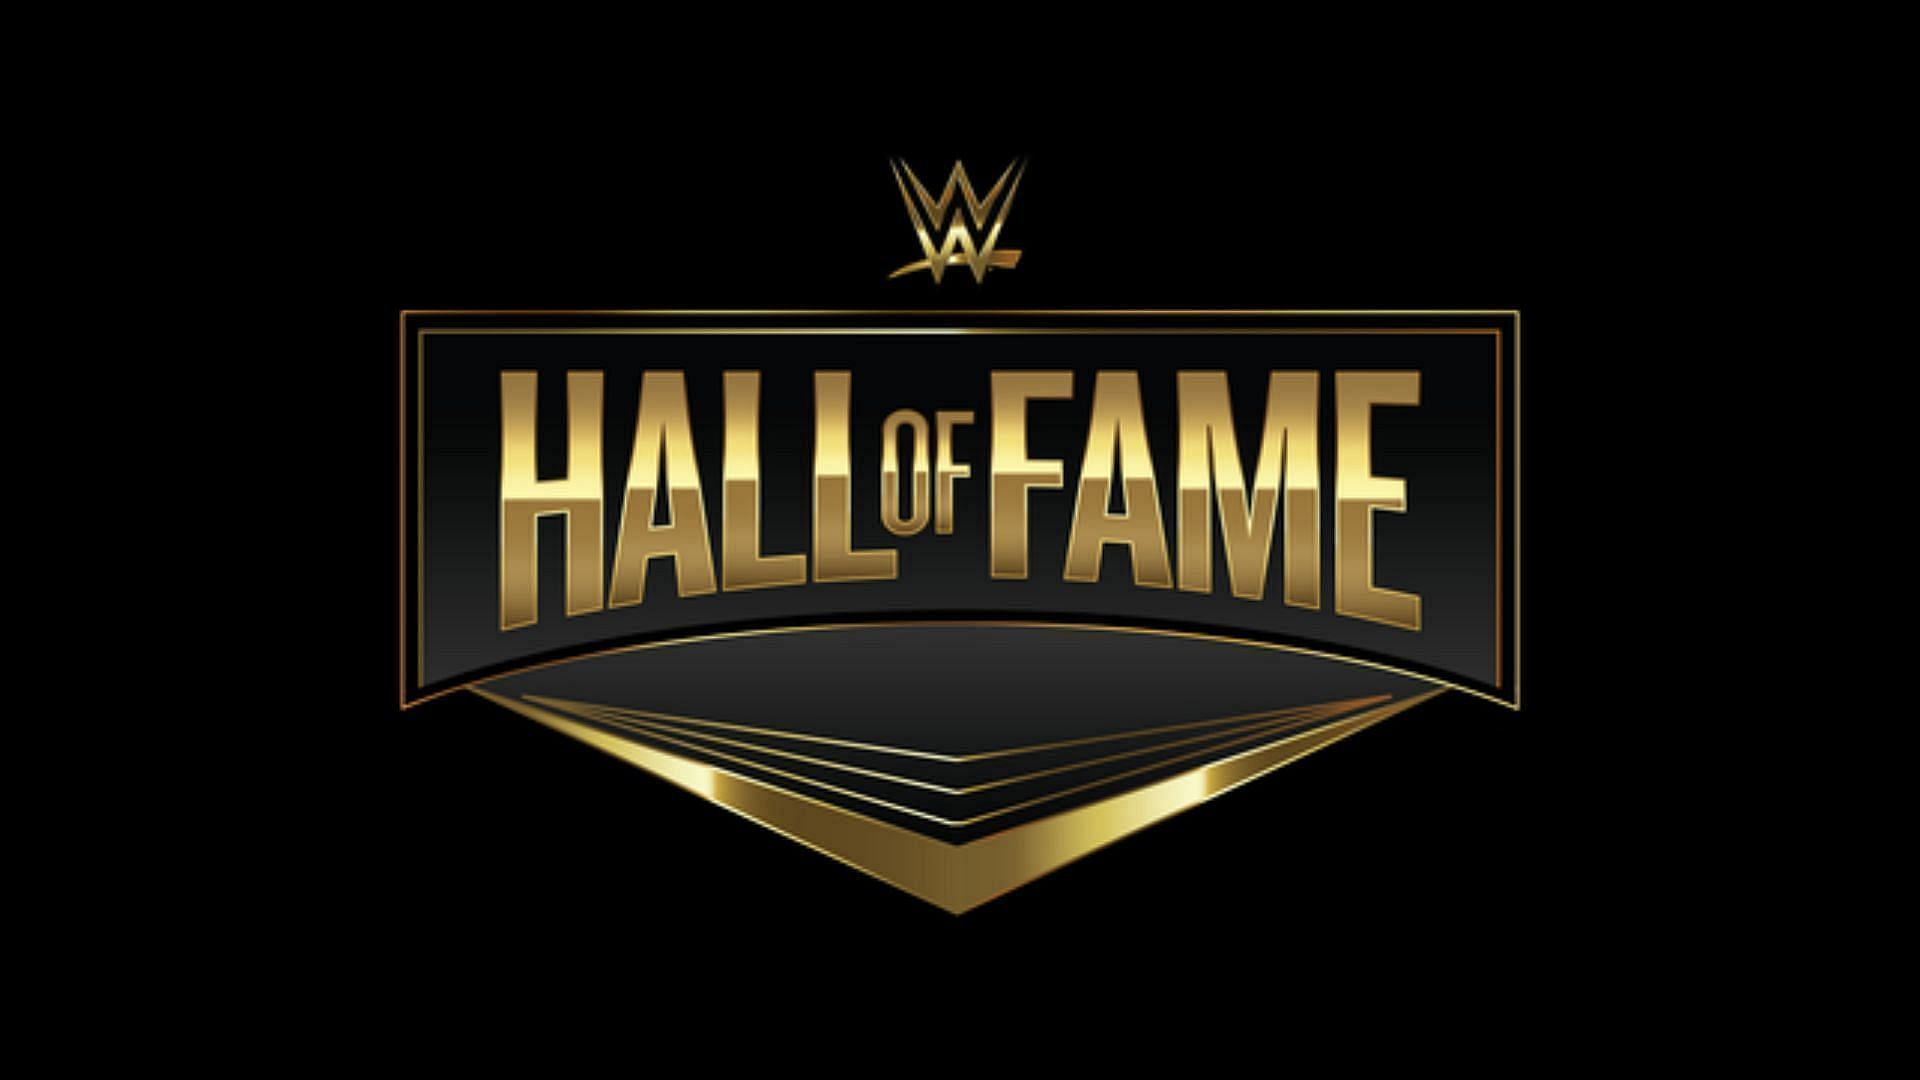 More than 200 legends have been inducted into the WWE Hall of Fame